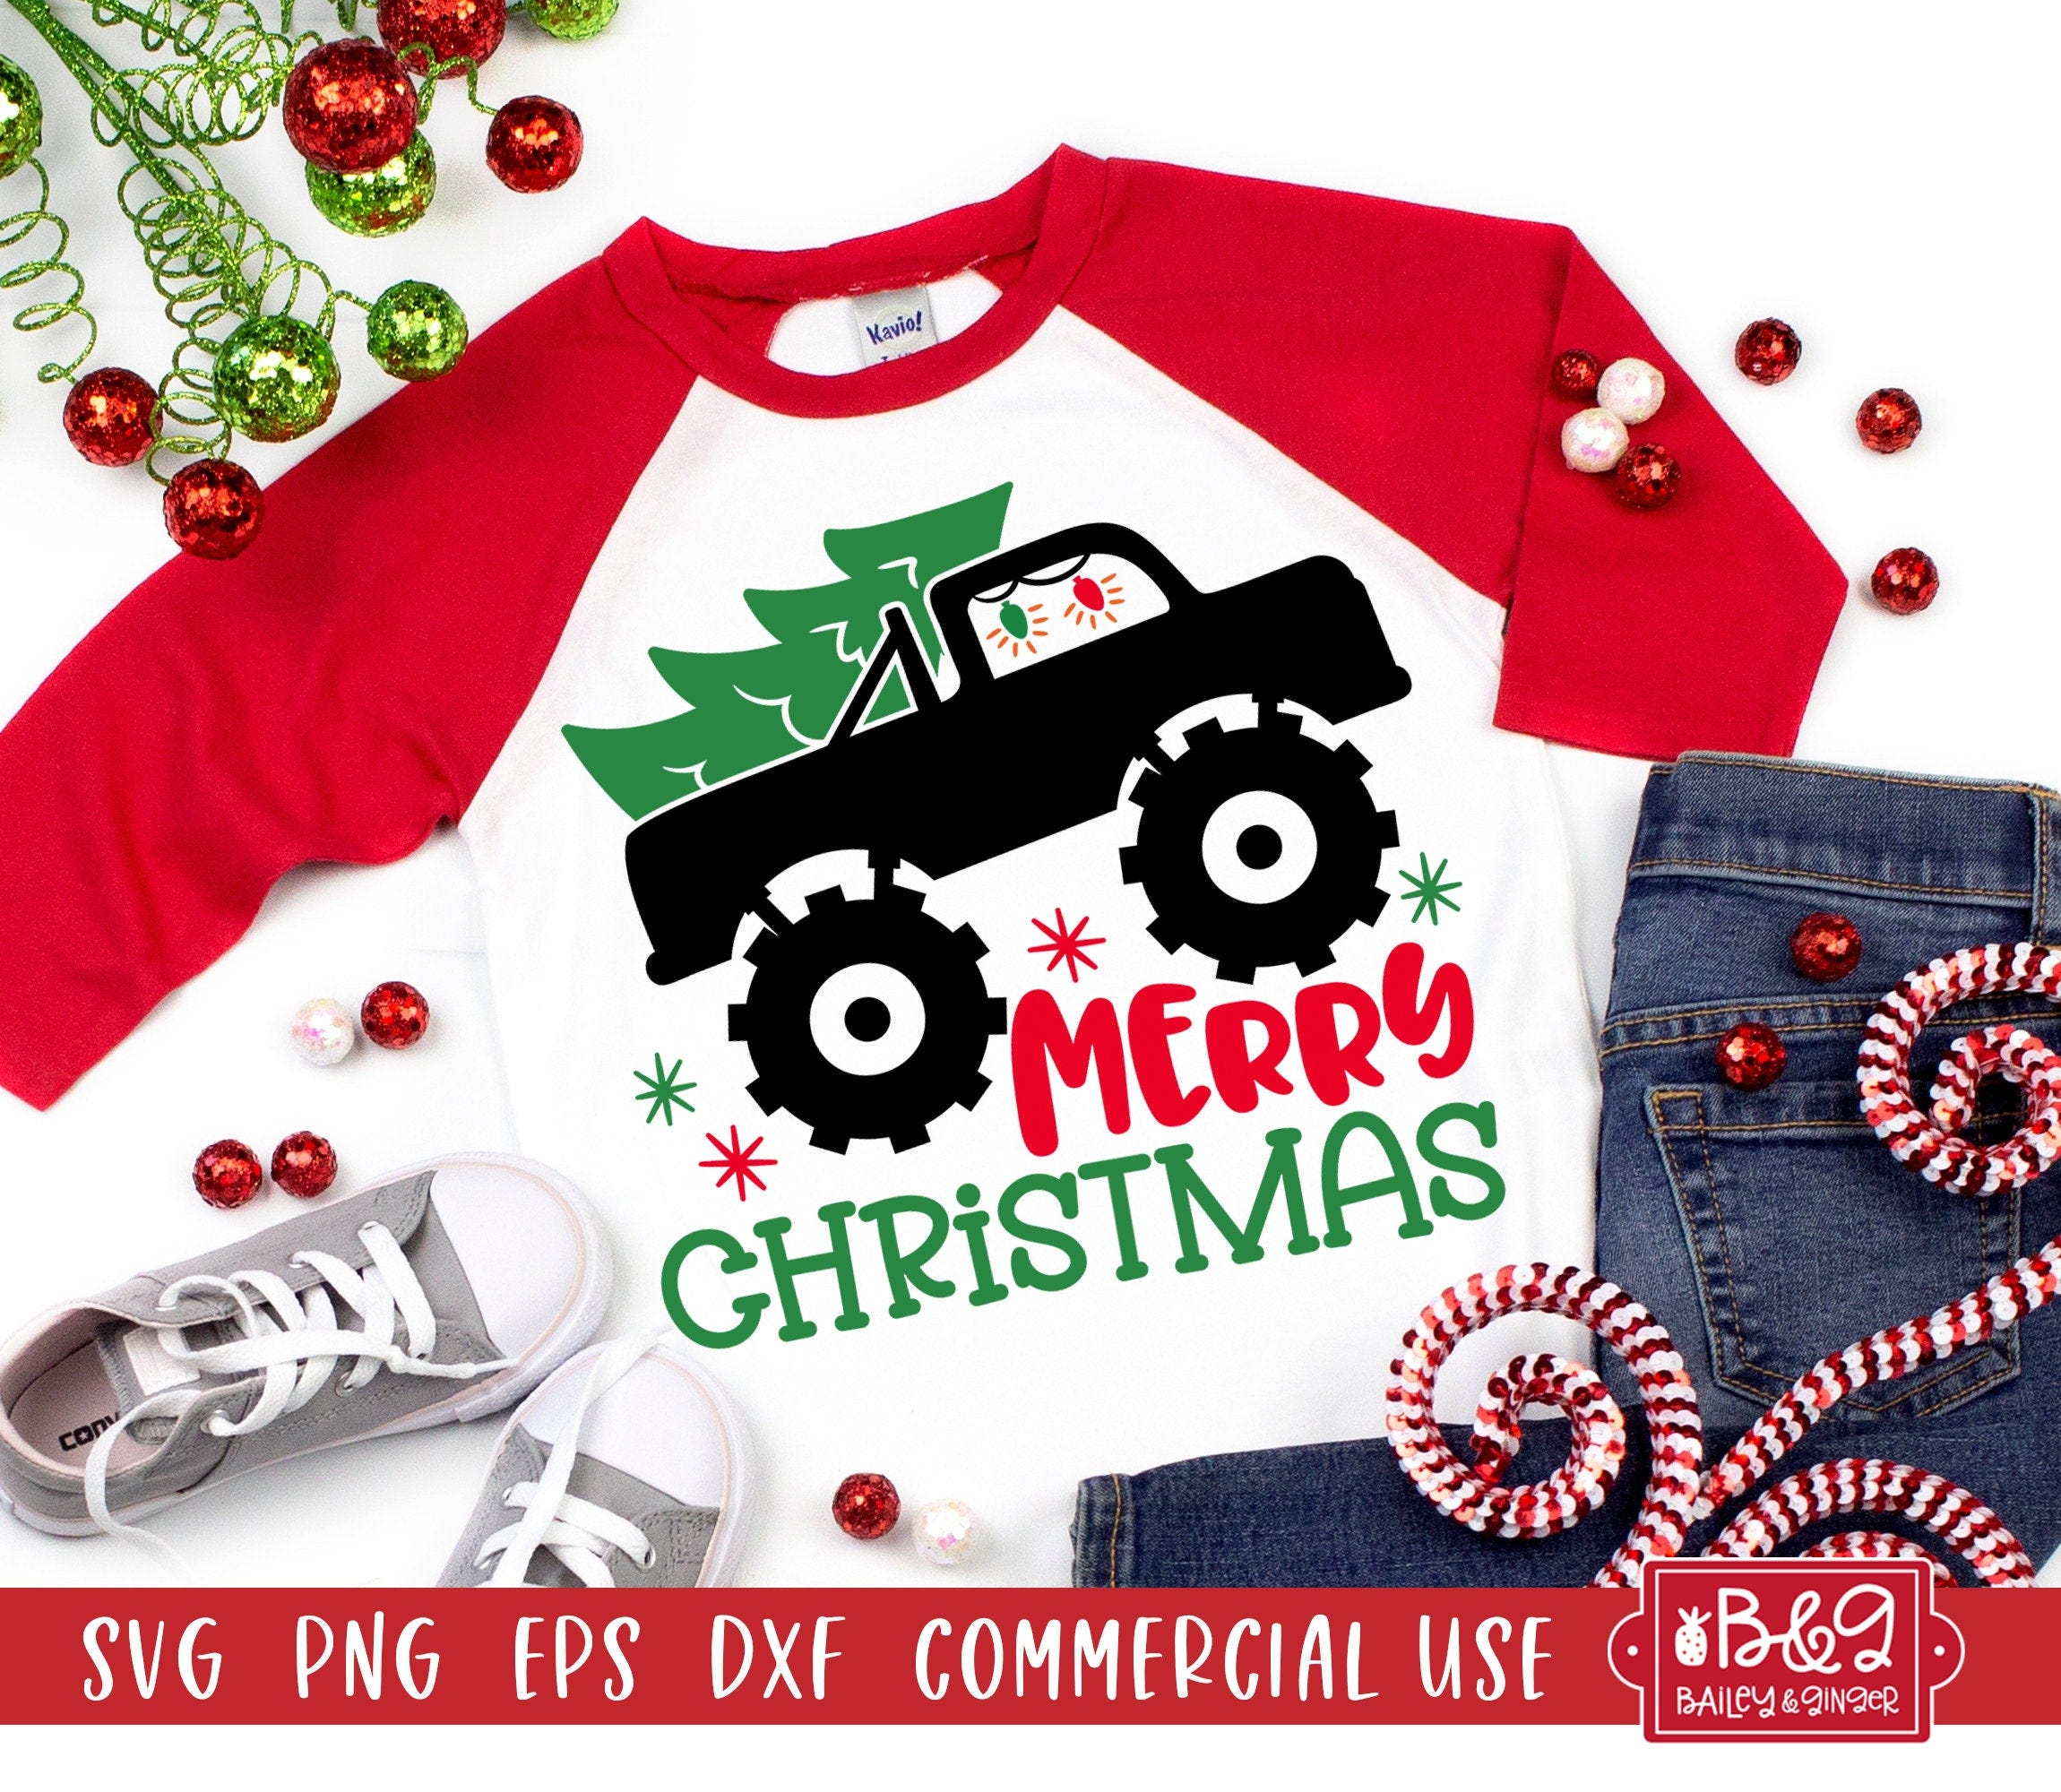 Christmas Monster Truck SVG Cut File - Christmas SVG for Boys Shirts, SVG Cut File, Commercial Use Cut Files for Cricut or Silhouette